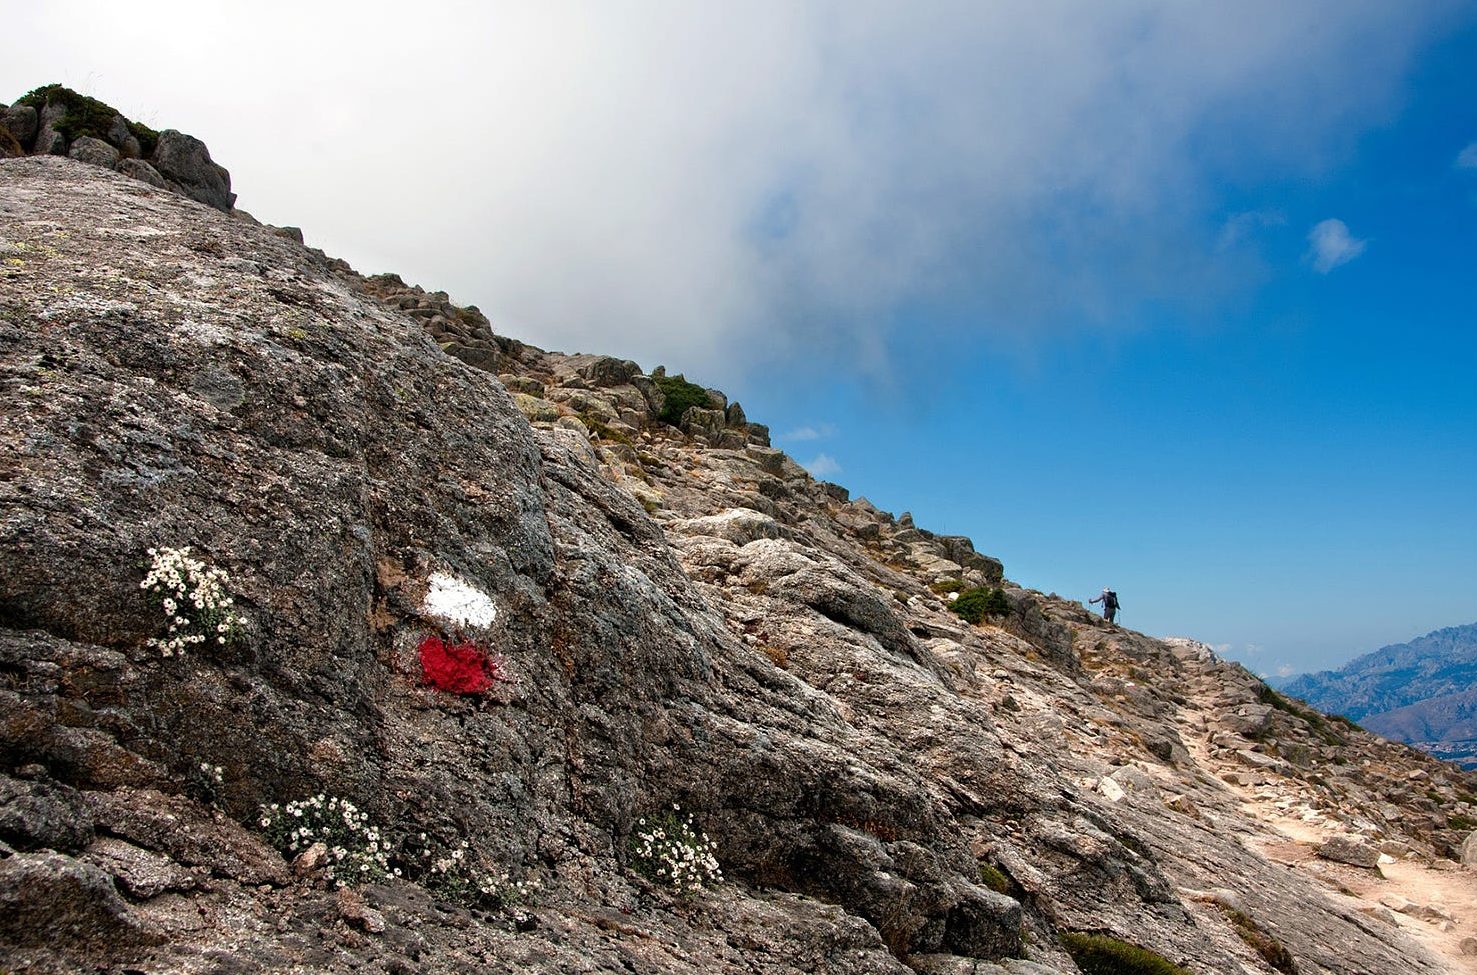 Red and white paint daubed on a rock on a very rocky mountainside in Corsica